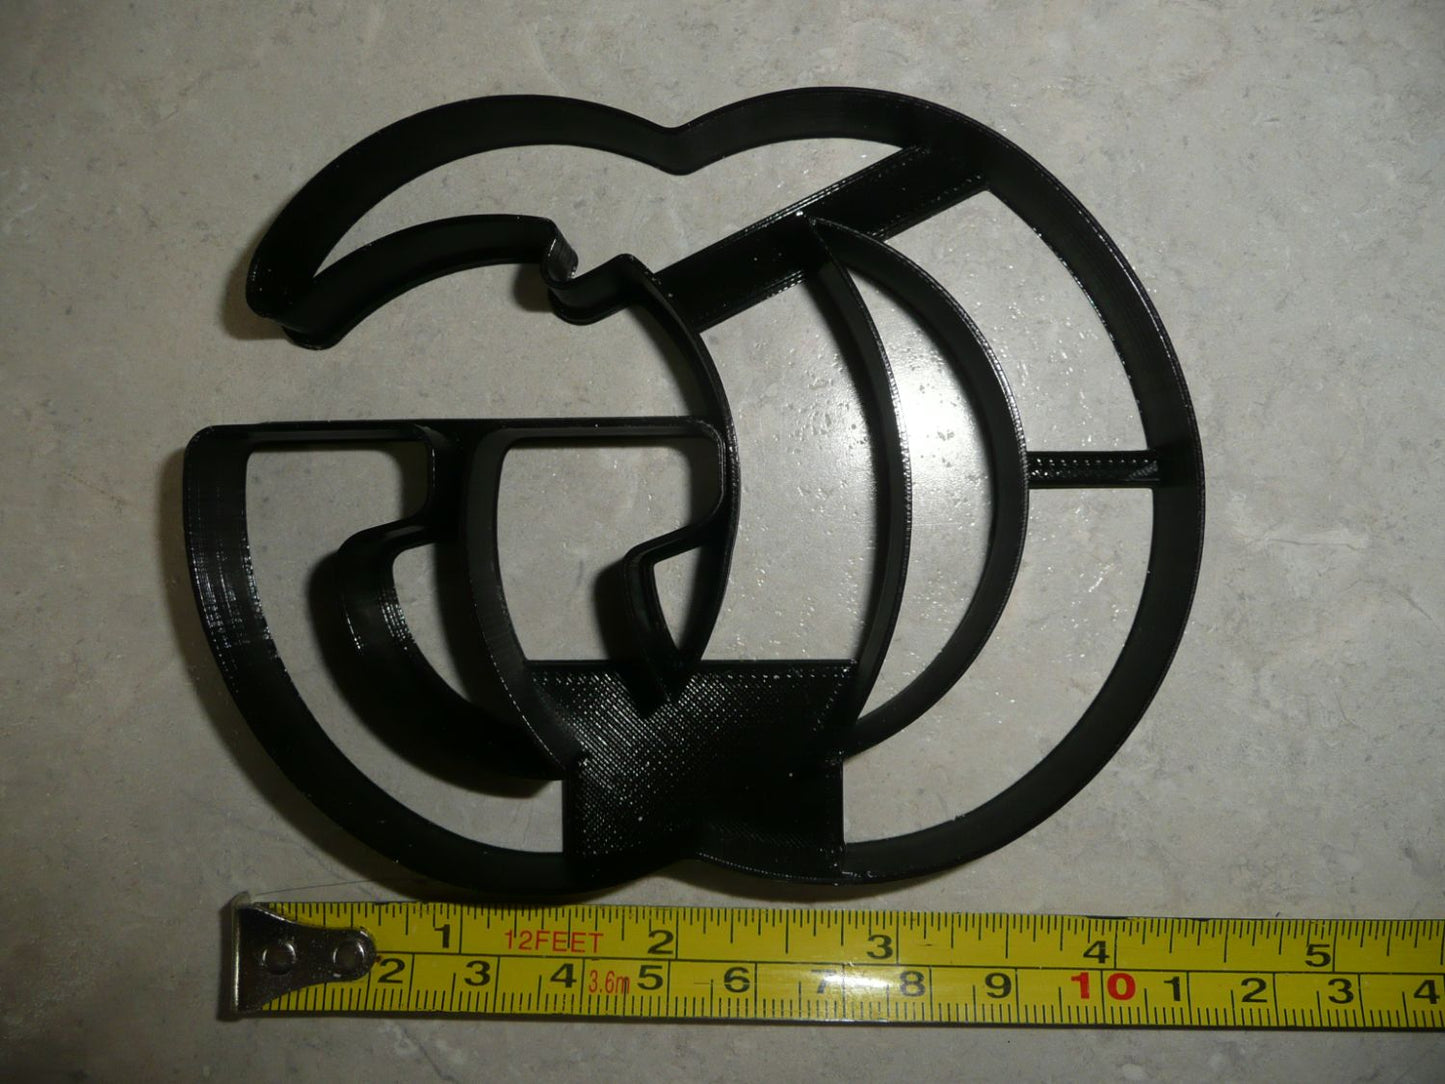 GG Outline Gucci Luxury Fashion Brand Cookie Cutter Made in USA PR4657